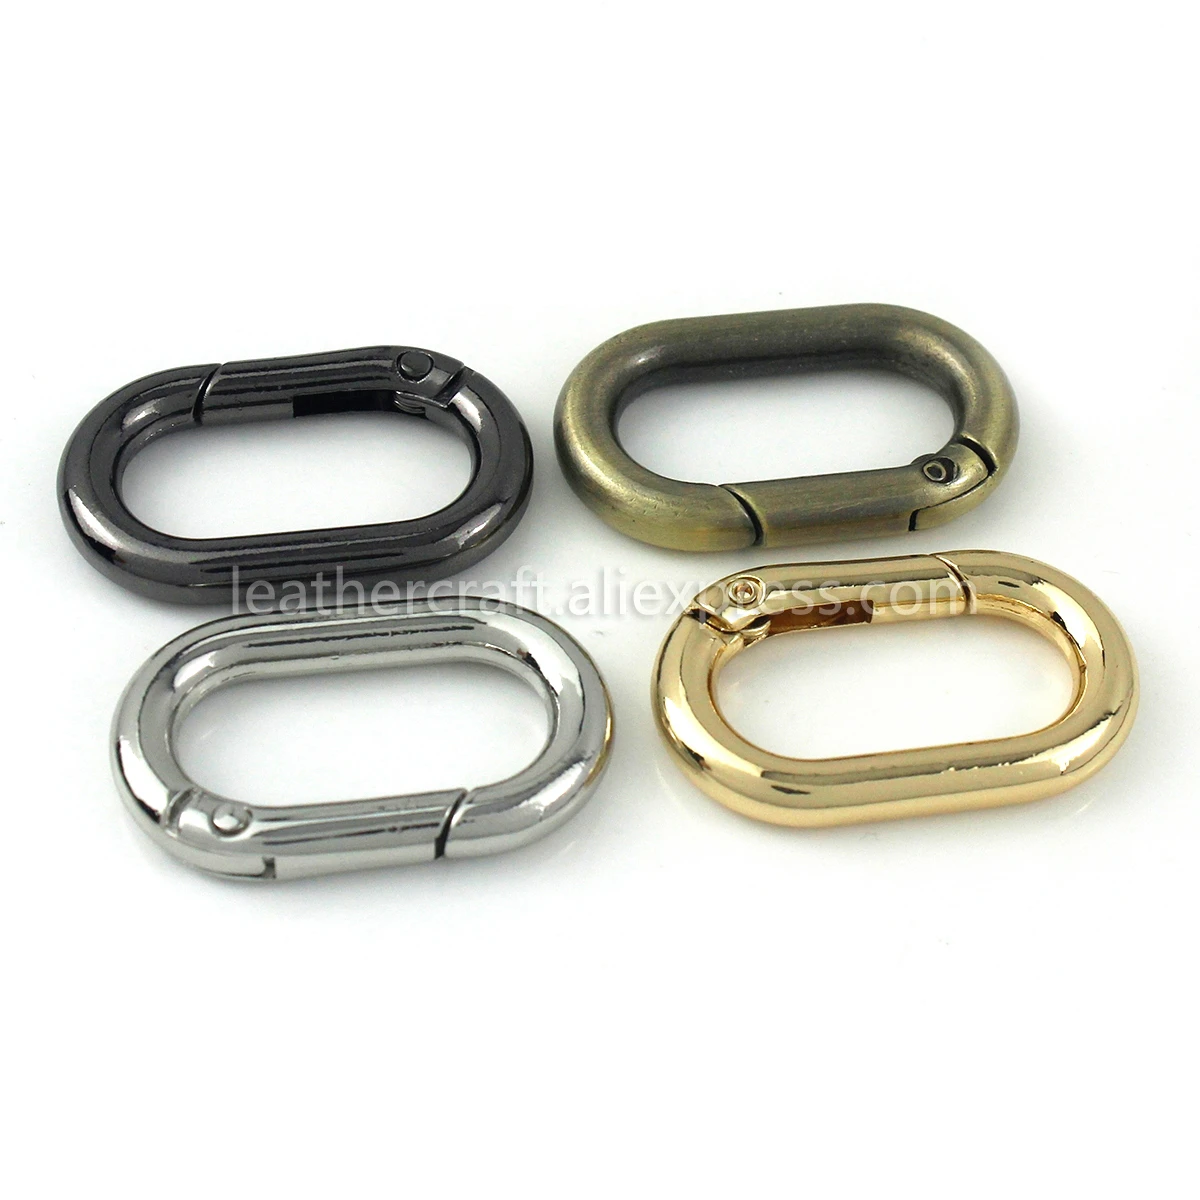 1x Metal Oval Ring Snap Hook Spring Gate Trigger Clasps Clips for Leather Craft Belt Strap Webbing Keychain Hooks